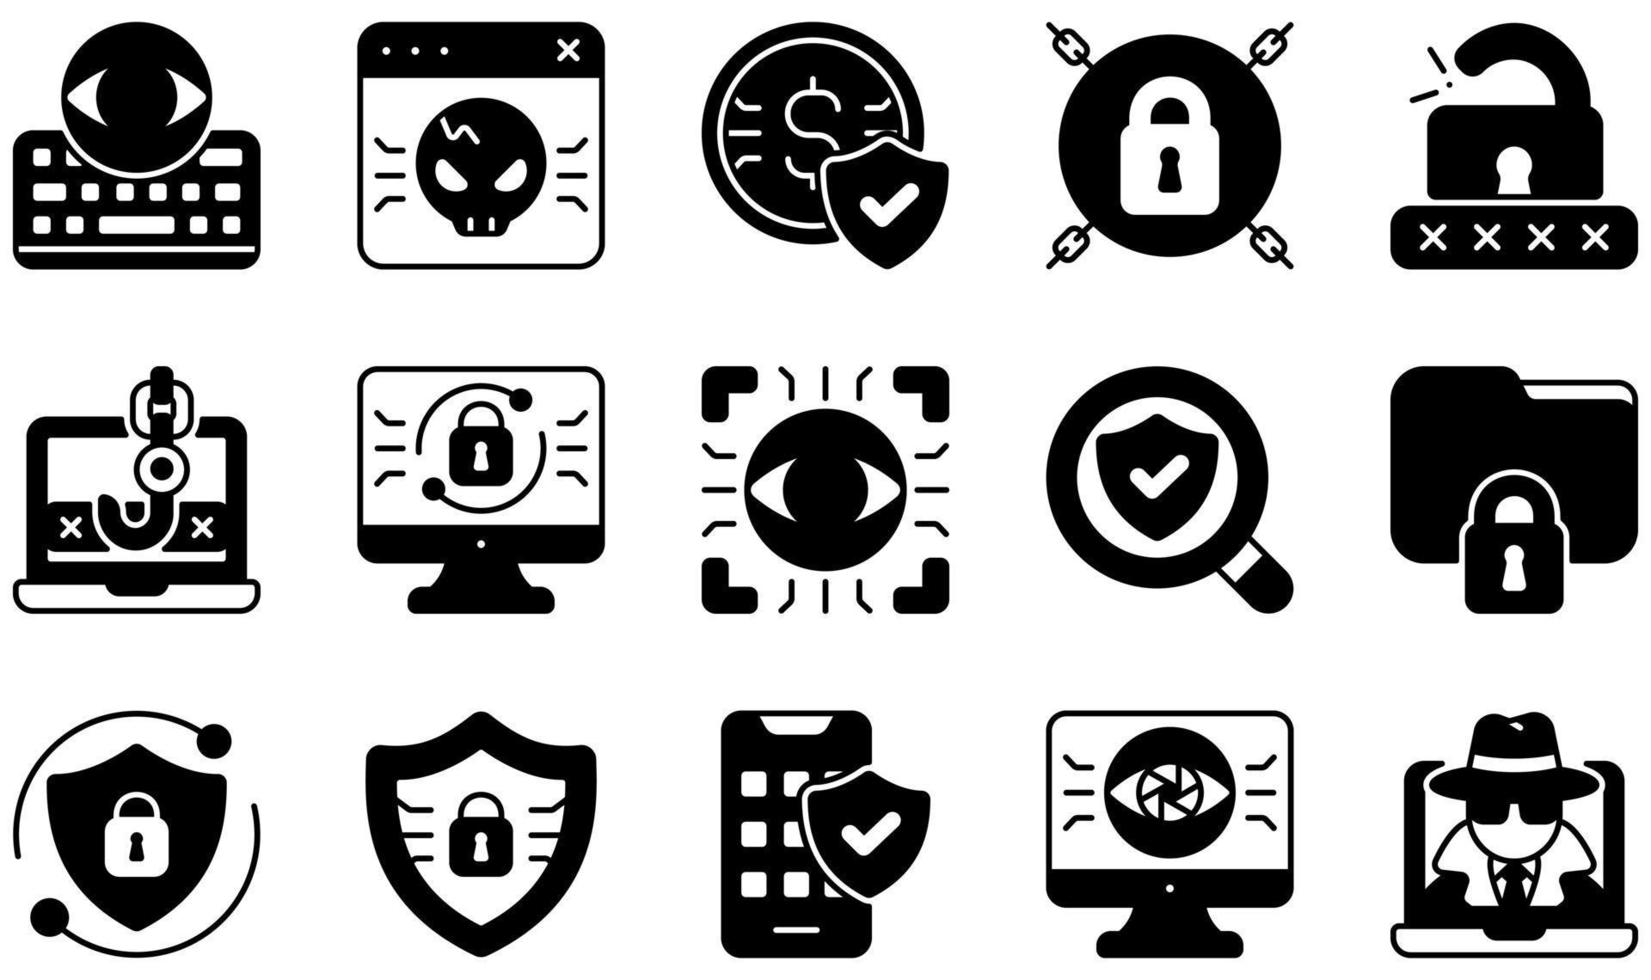 Set of Vector Icons Related to Cyber Security. Contains such Icons as Keylogger, Malware, Money, Padlock, Ransomware, Phishing and more.